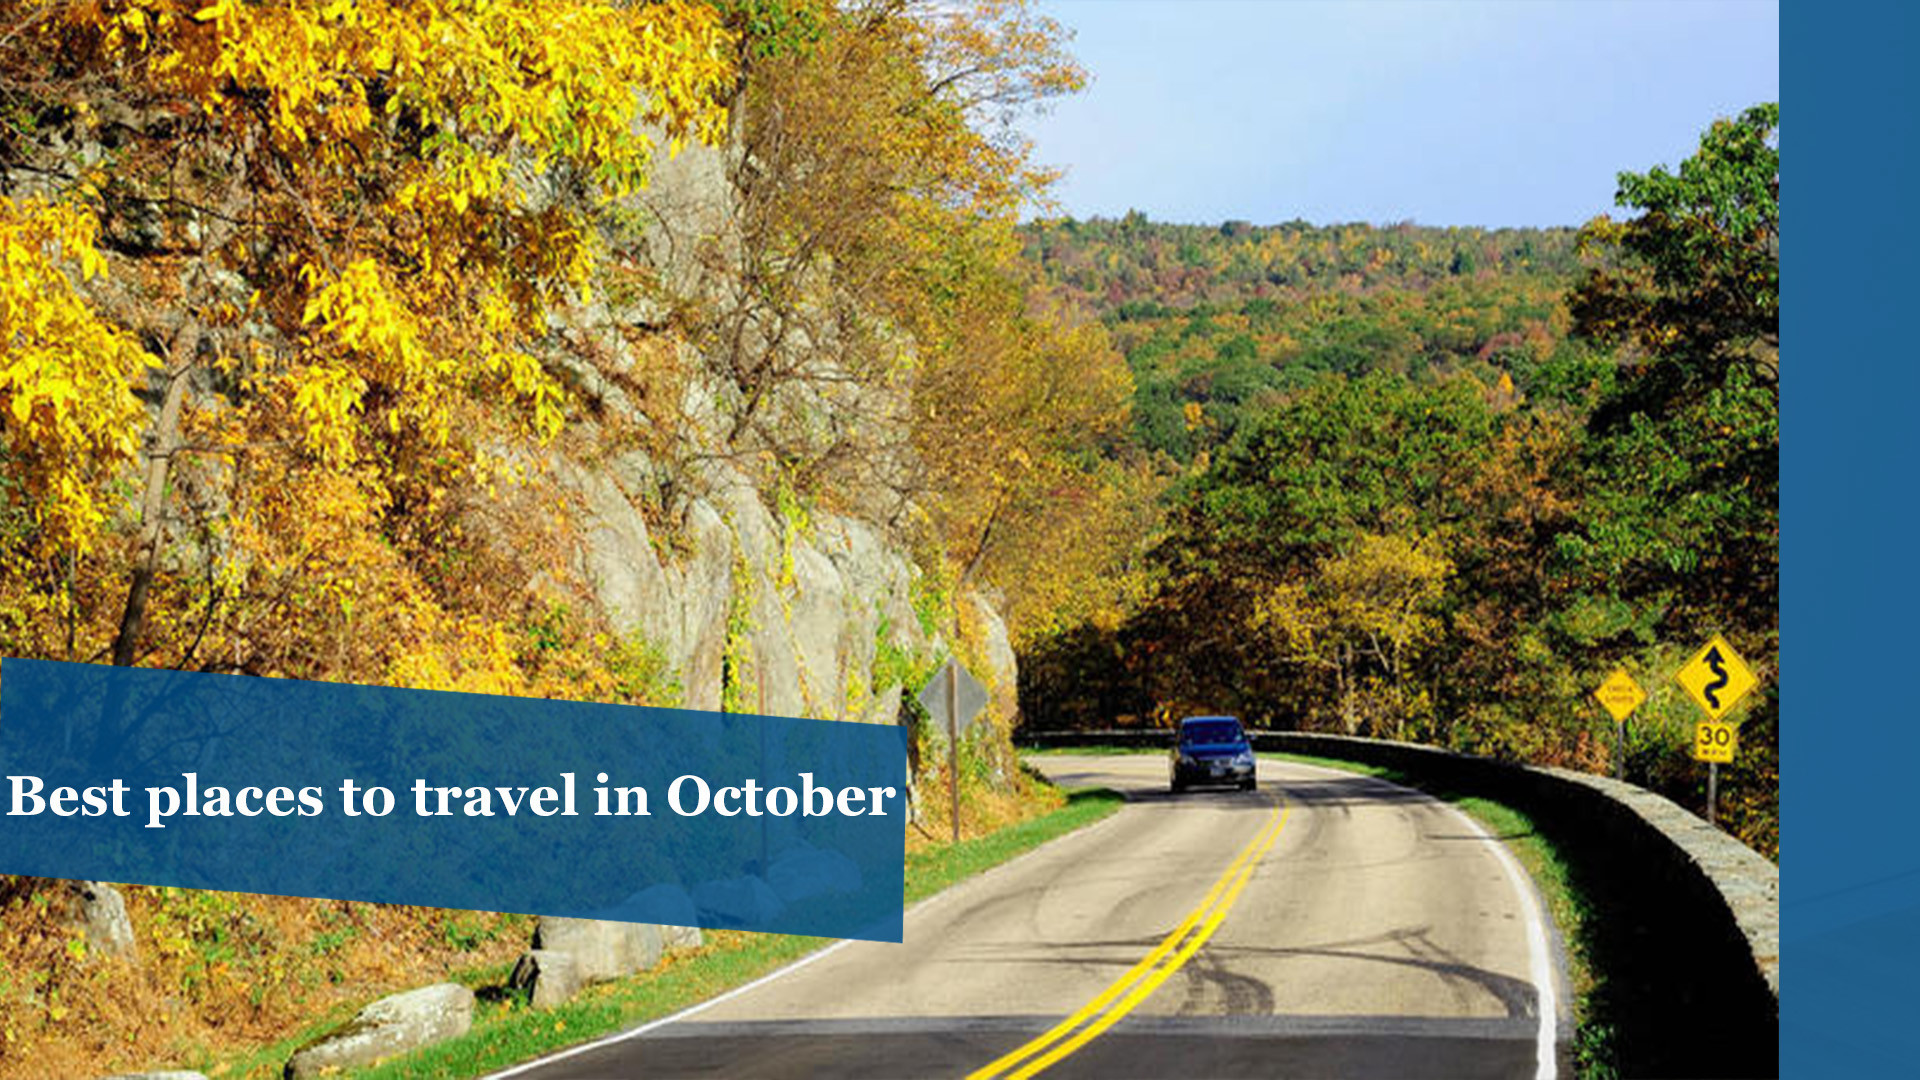 Best places to travel in October - Chicago Tribune